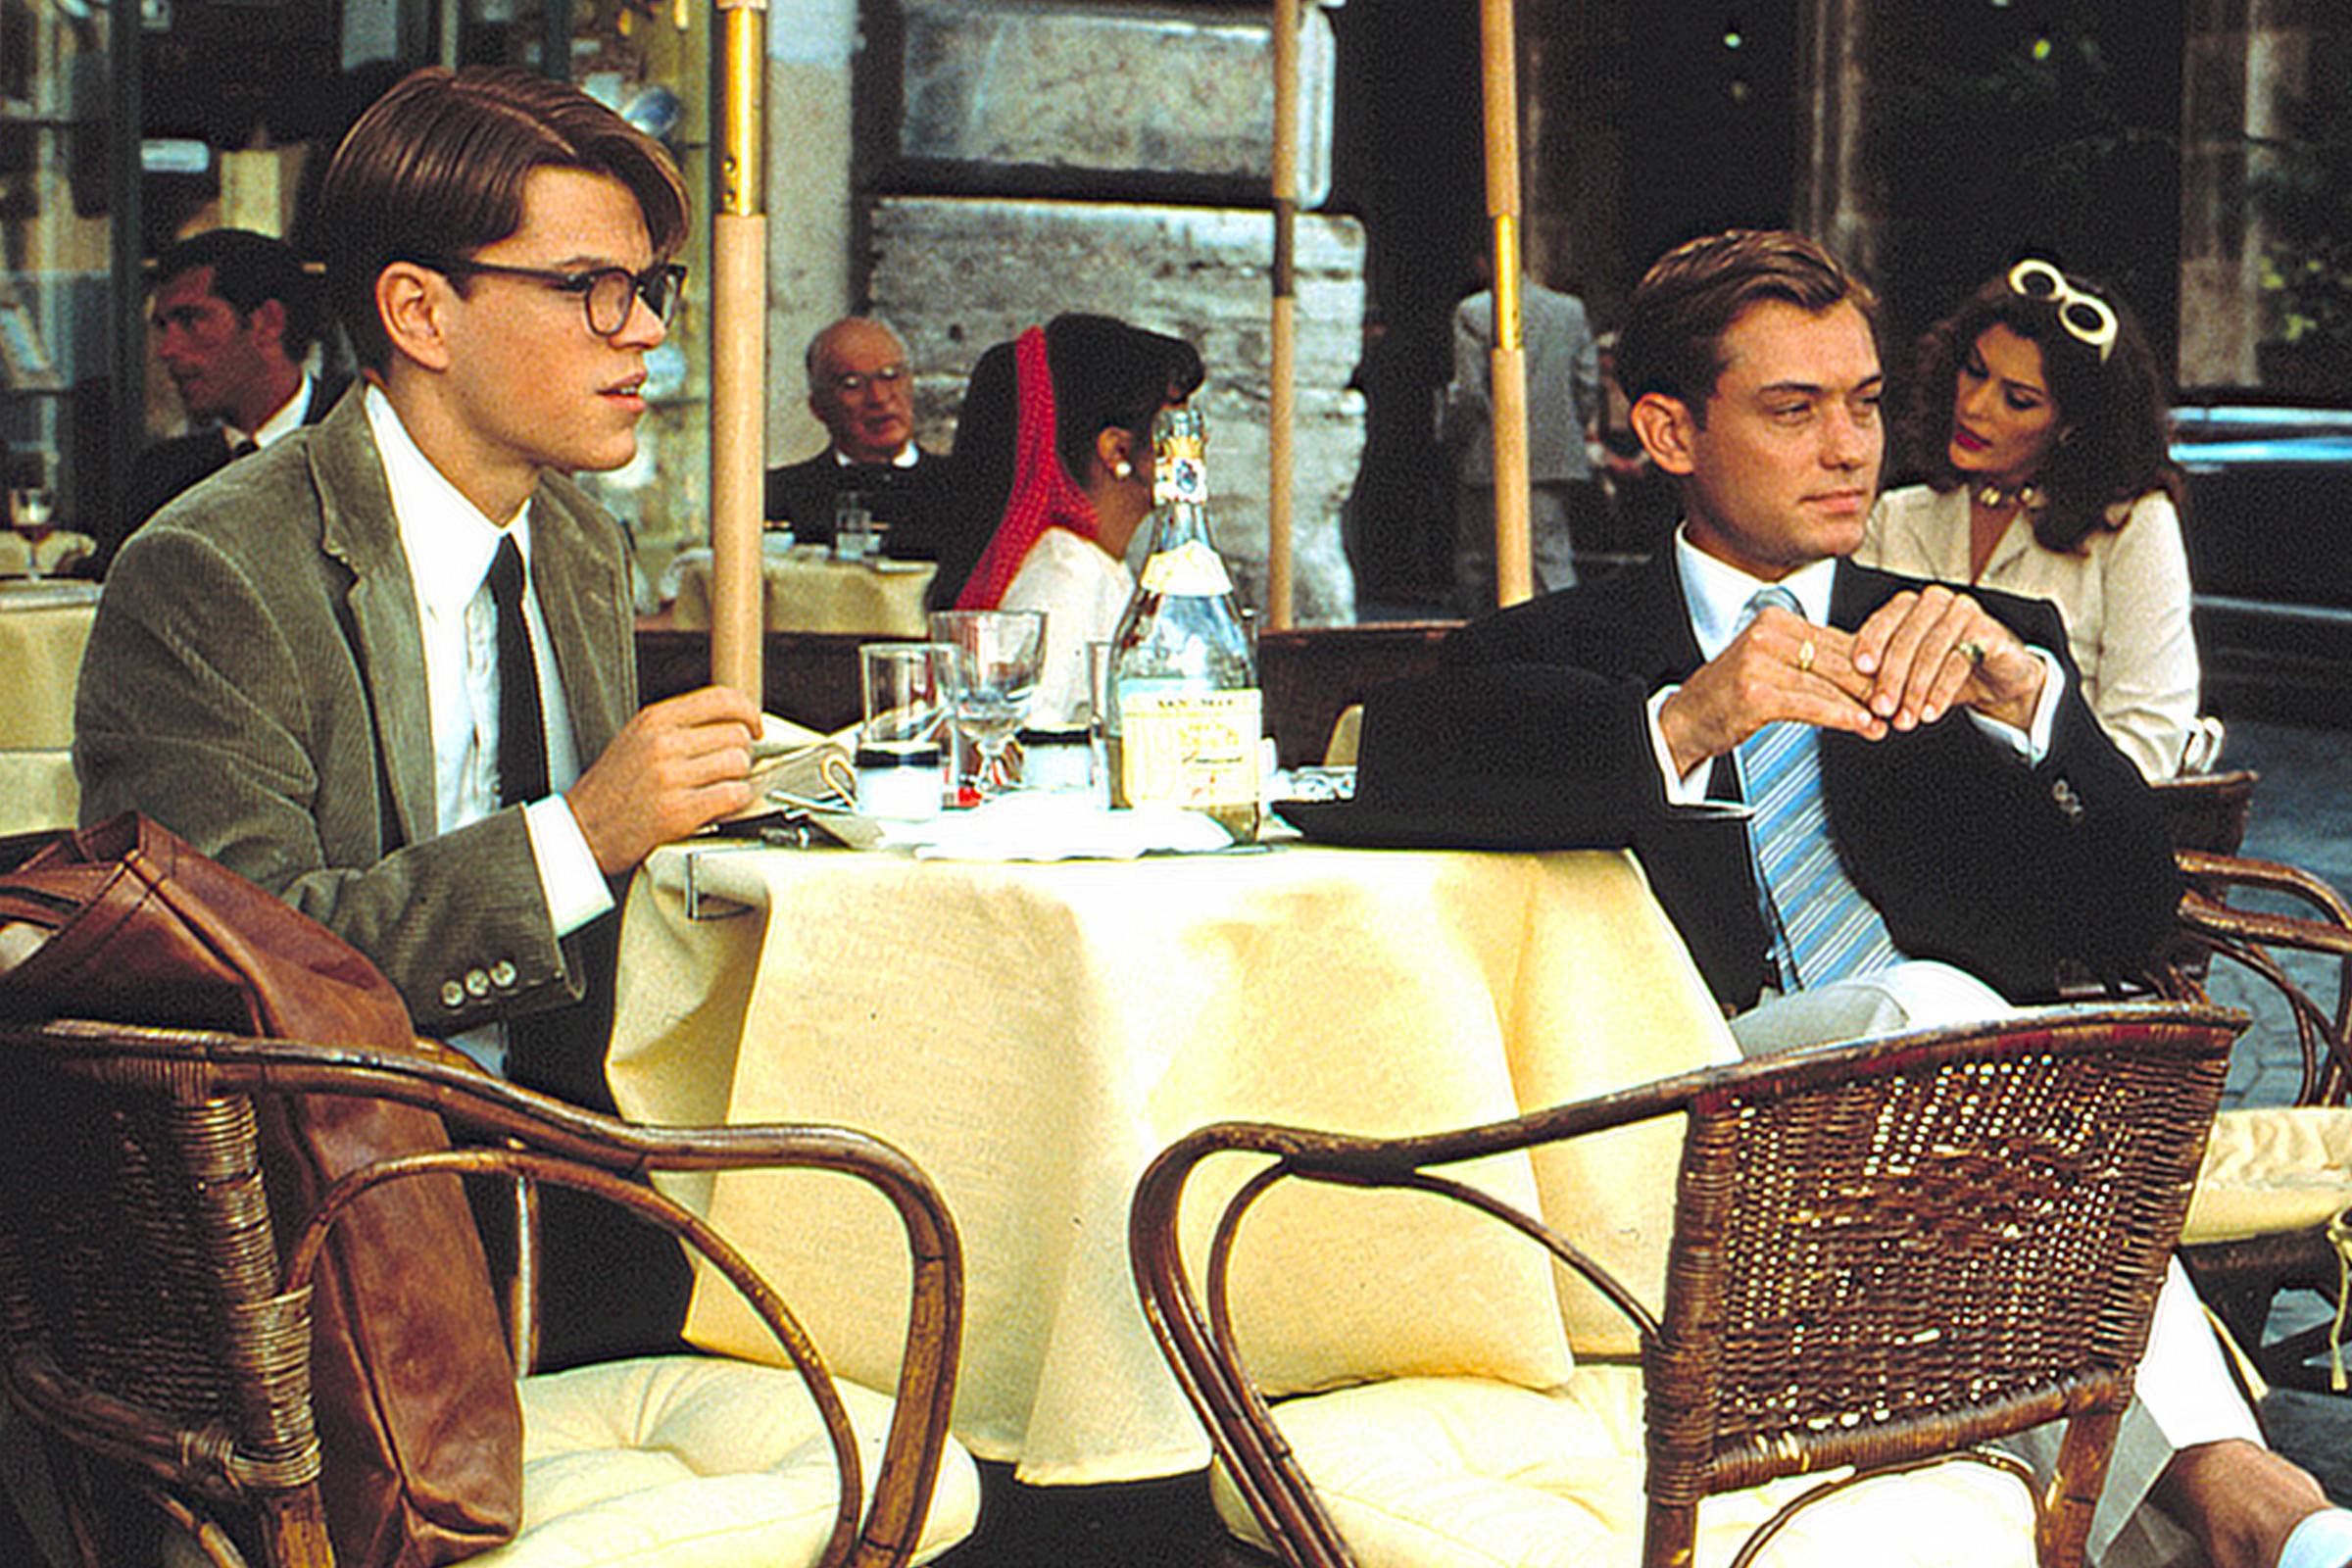 Revisiting The Talented Mr. Ripley's timeless fashion